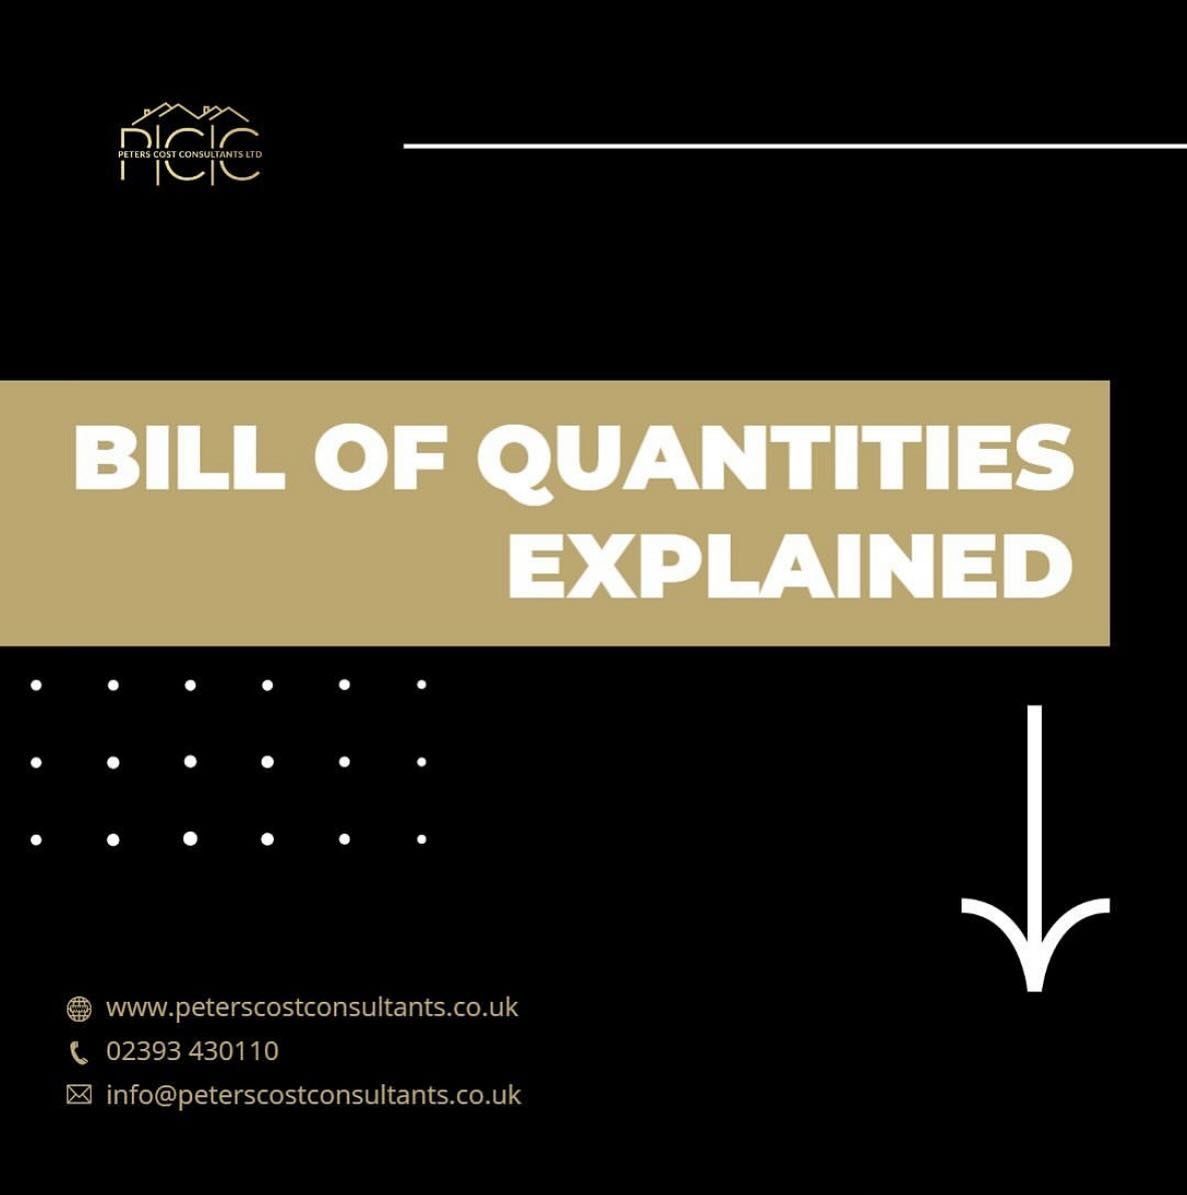 ✍️A bill of quantities (BOQ) is a document commonly used in construction projects to itemise and quantify the materials, labor, equipment, and other resources required to complete the project. It provides a detailed breakdown of the project&rsquo;s c